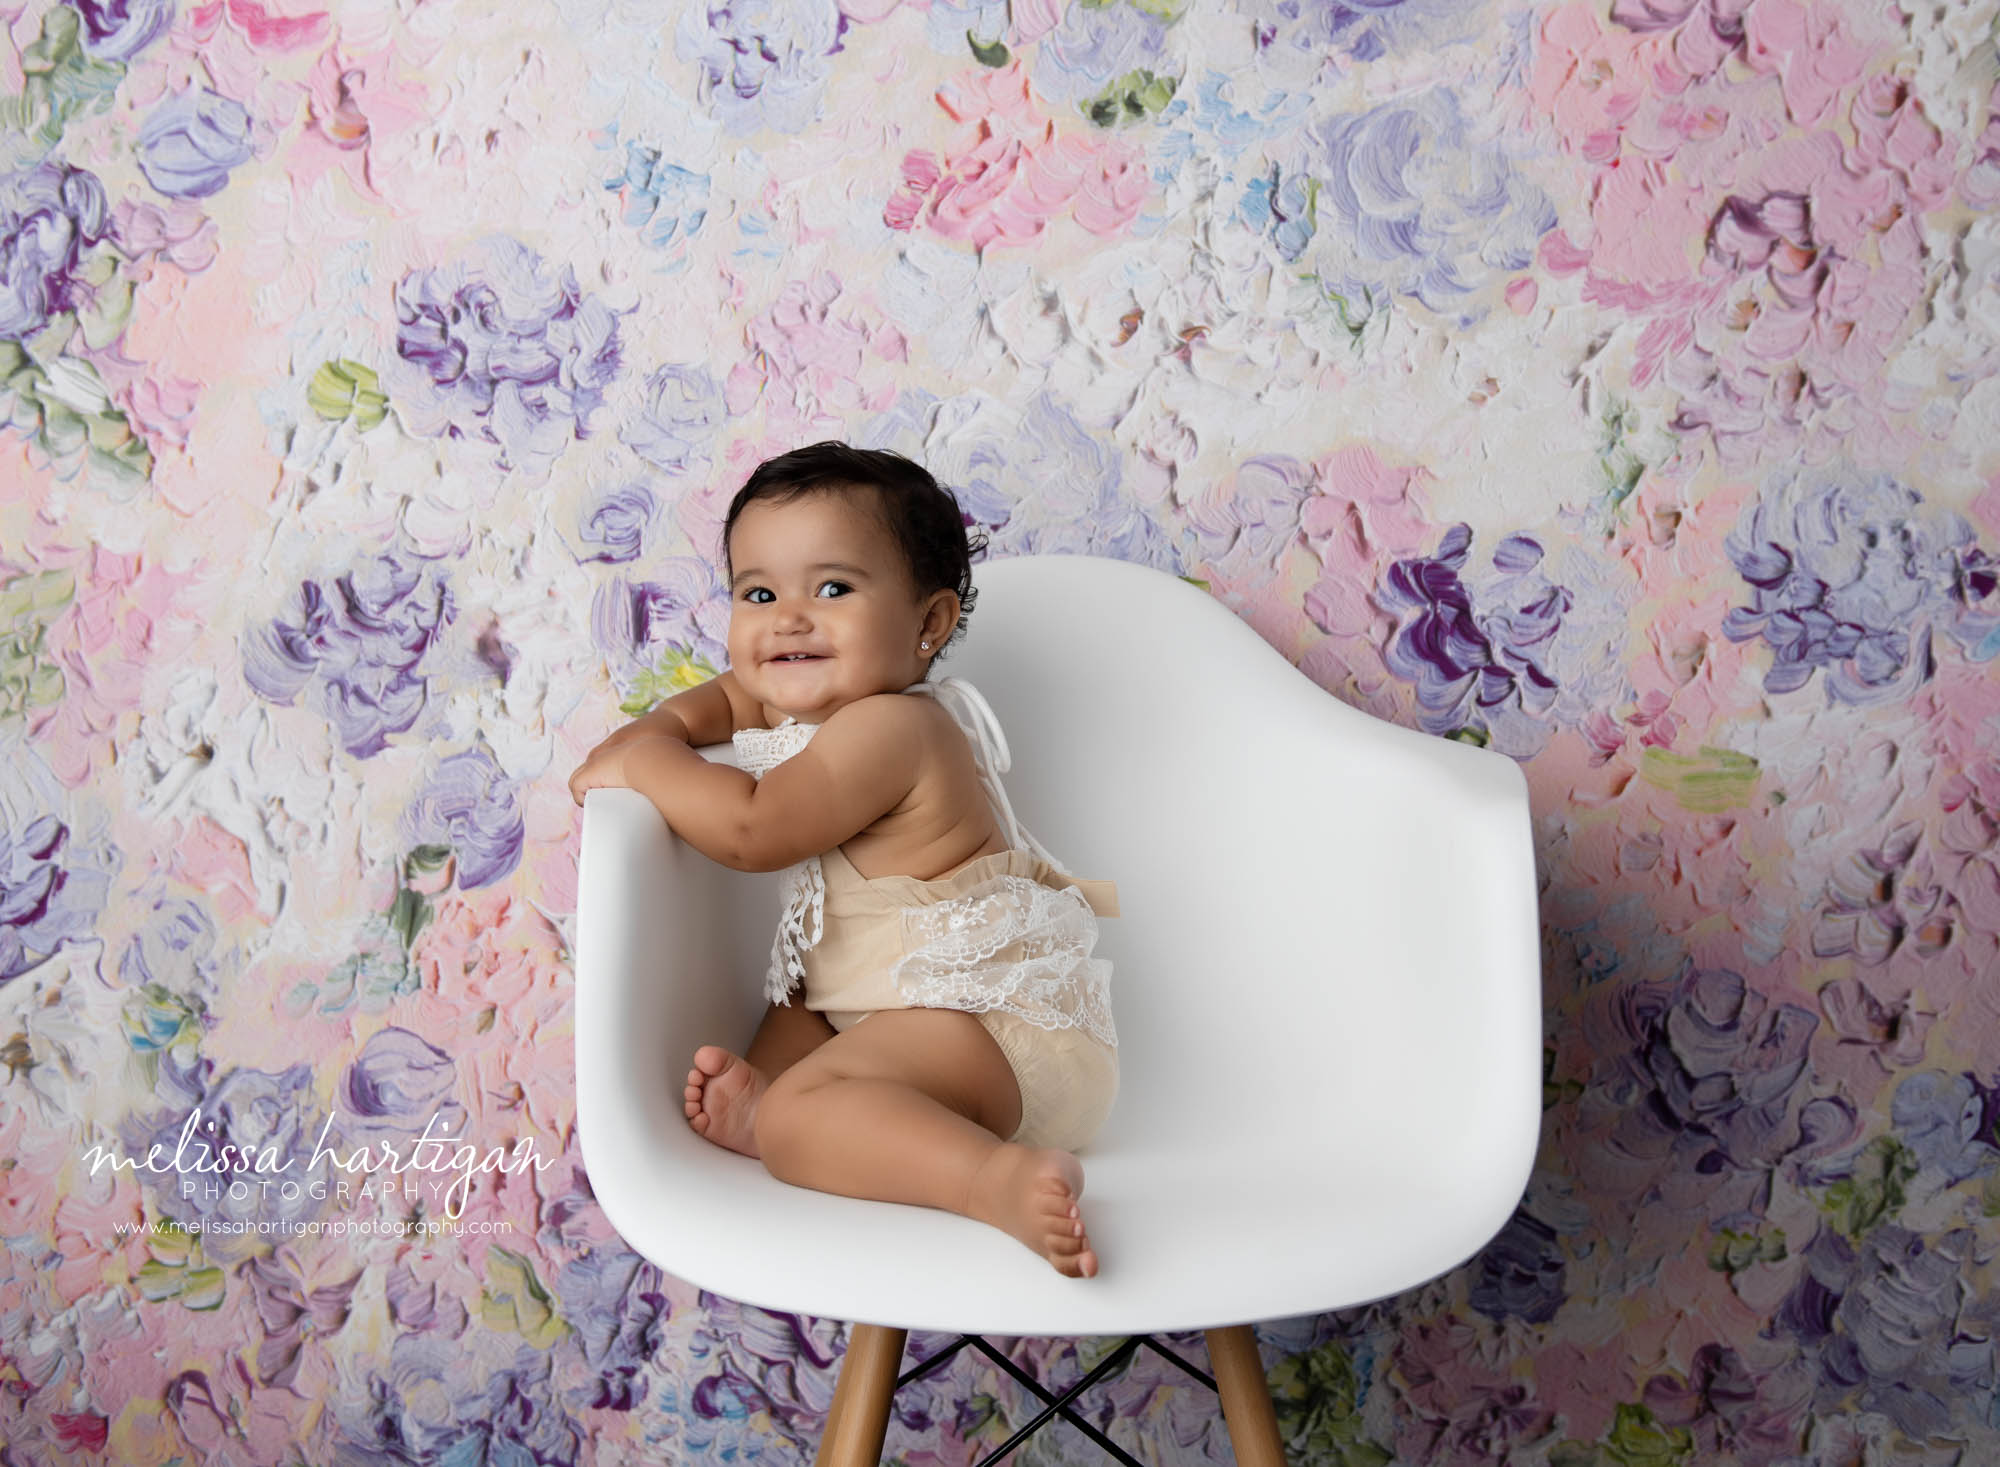 Baby girl sitting in white studio chair holding sides looking at camera smiling wearing baby milestone outfit